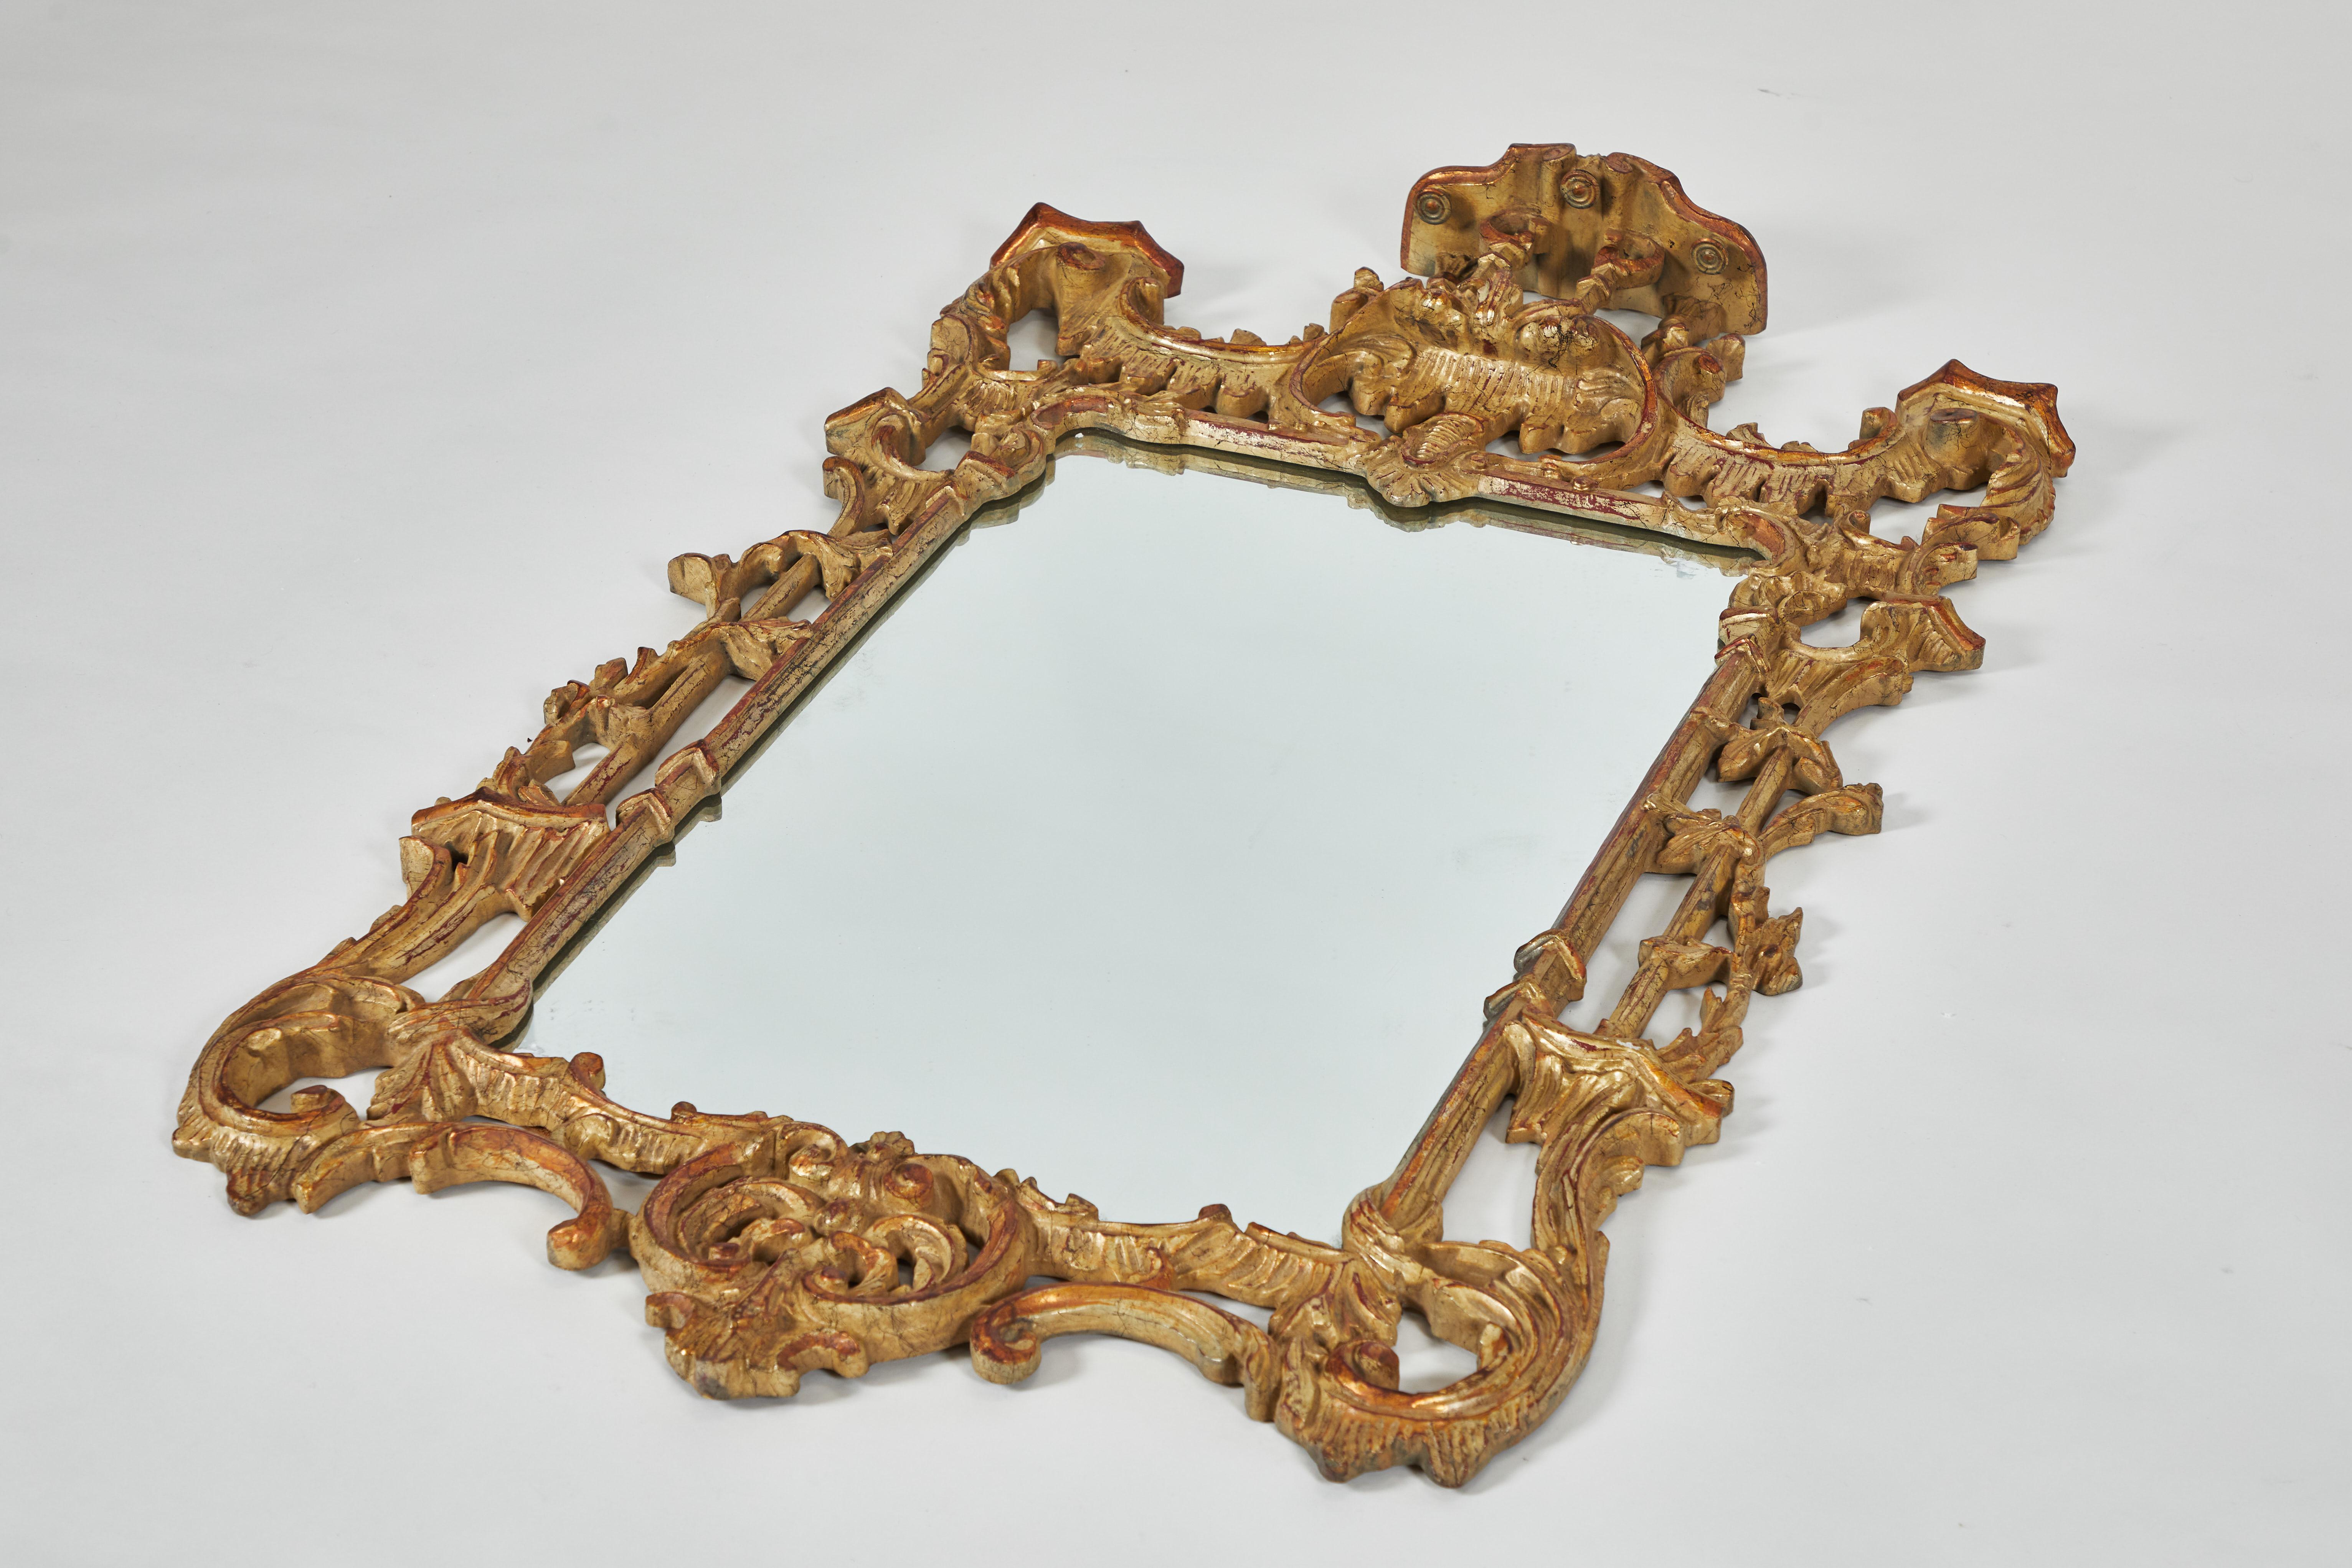 A George III style beautifully carved giltwood wall mirror in the Rococo style in the manner of Thomas Chippendale. A pagoda sits atop the crest above a rectangular mirror plate and surrounded by a scrolling, latticed frame.
20th century.